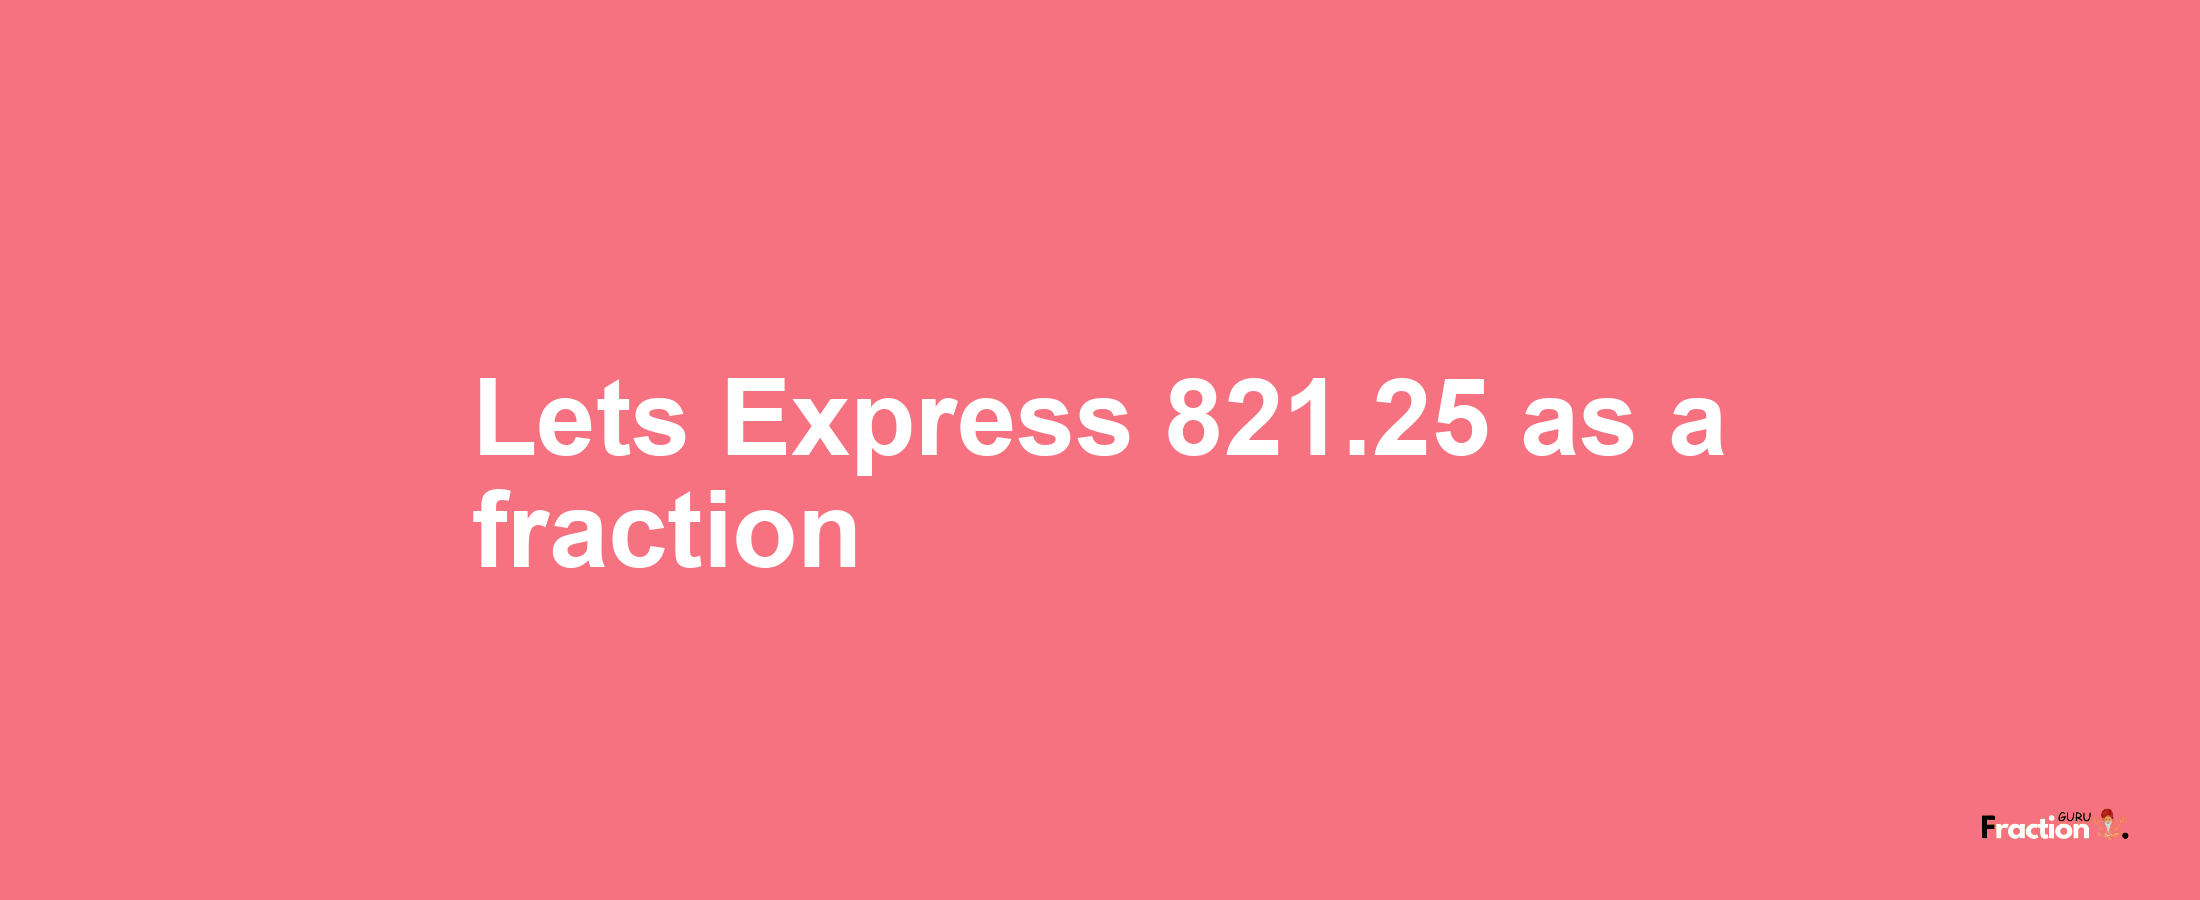 Lets Express 821.25 as afraction